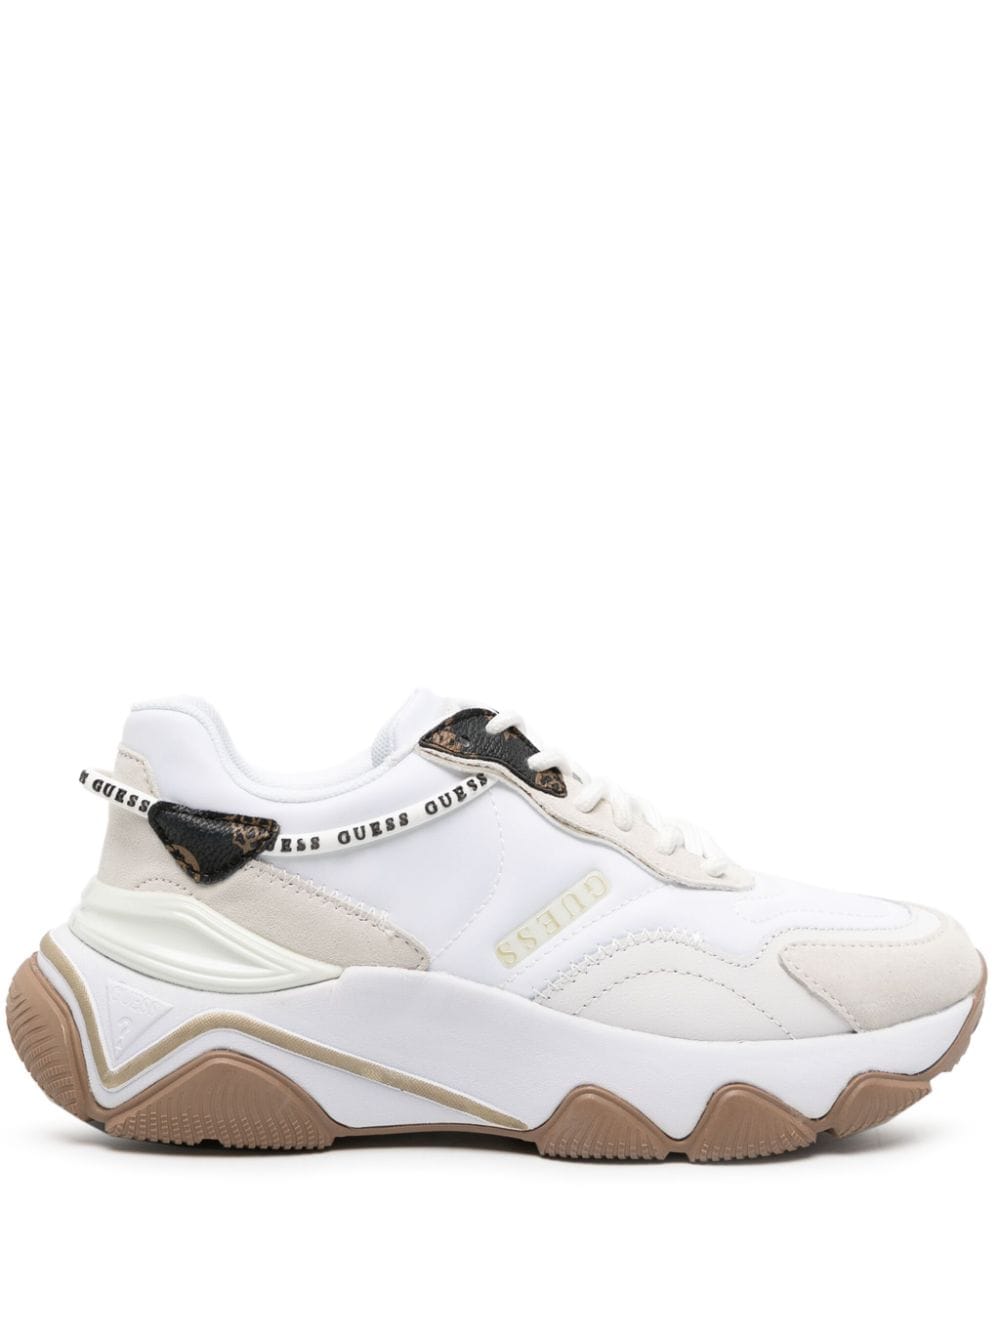 GUESS USA Micola Active chunky sneakers - White von GUESS USA